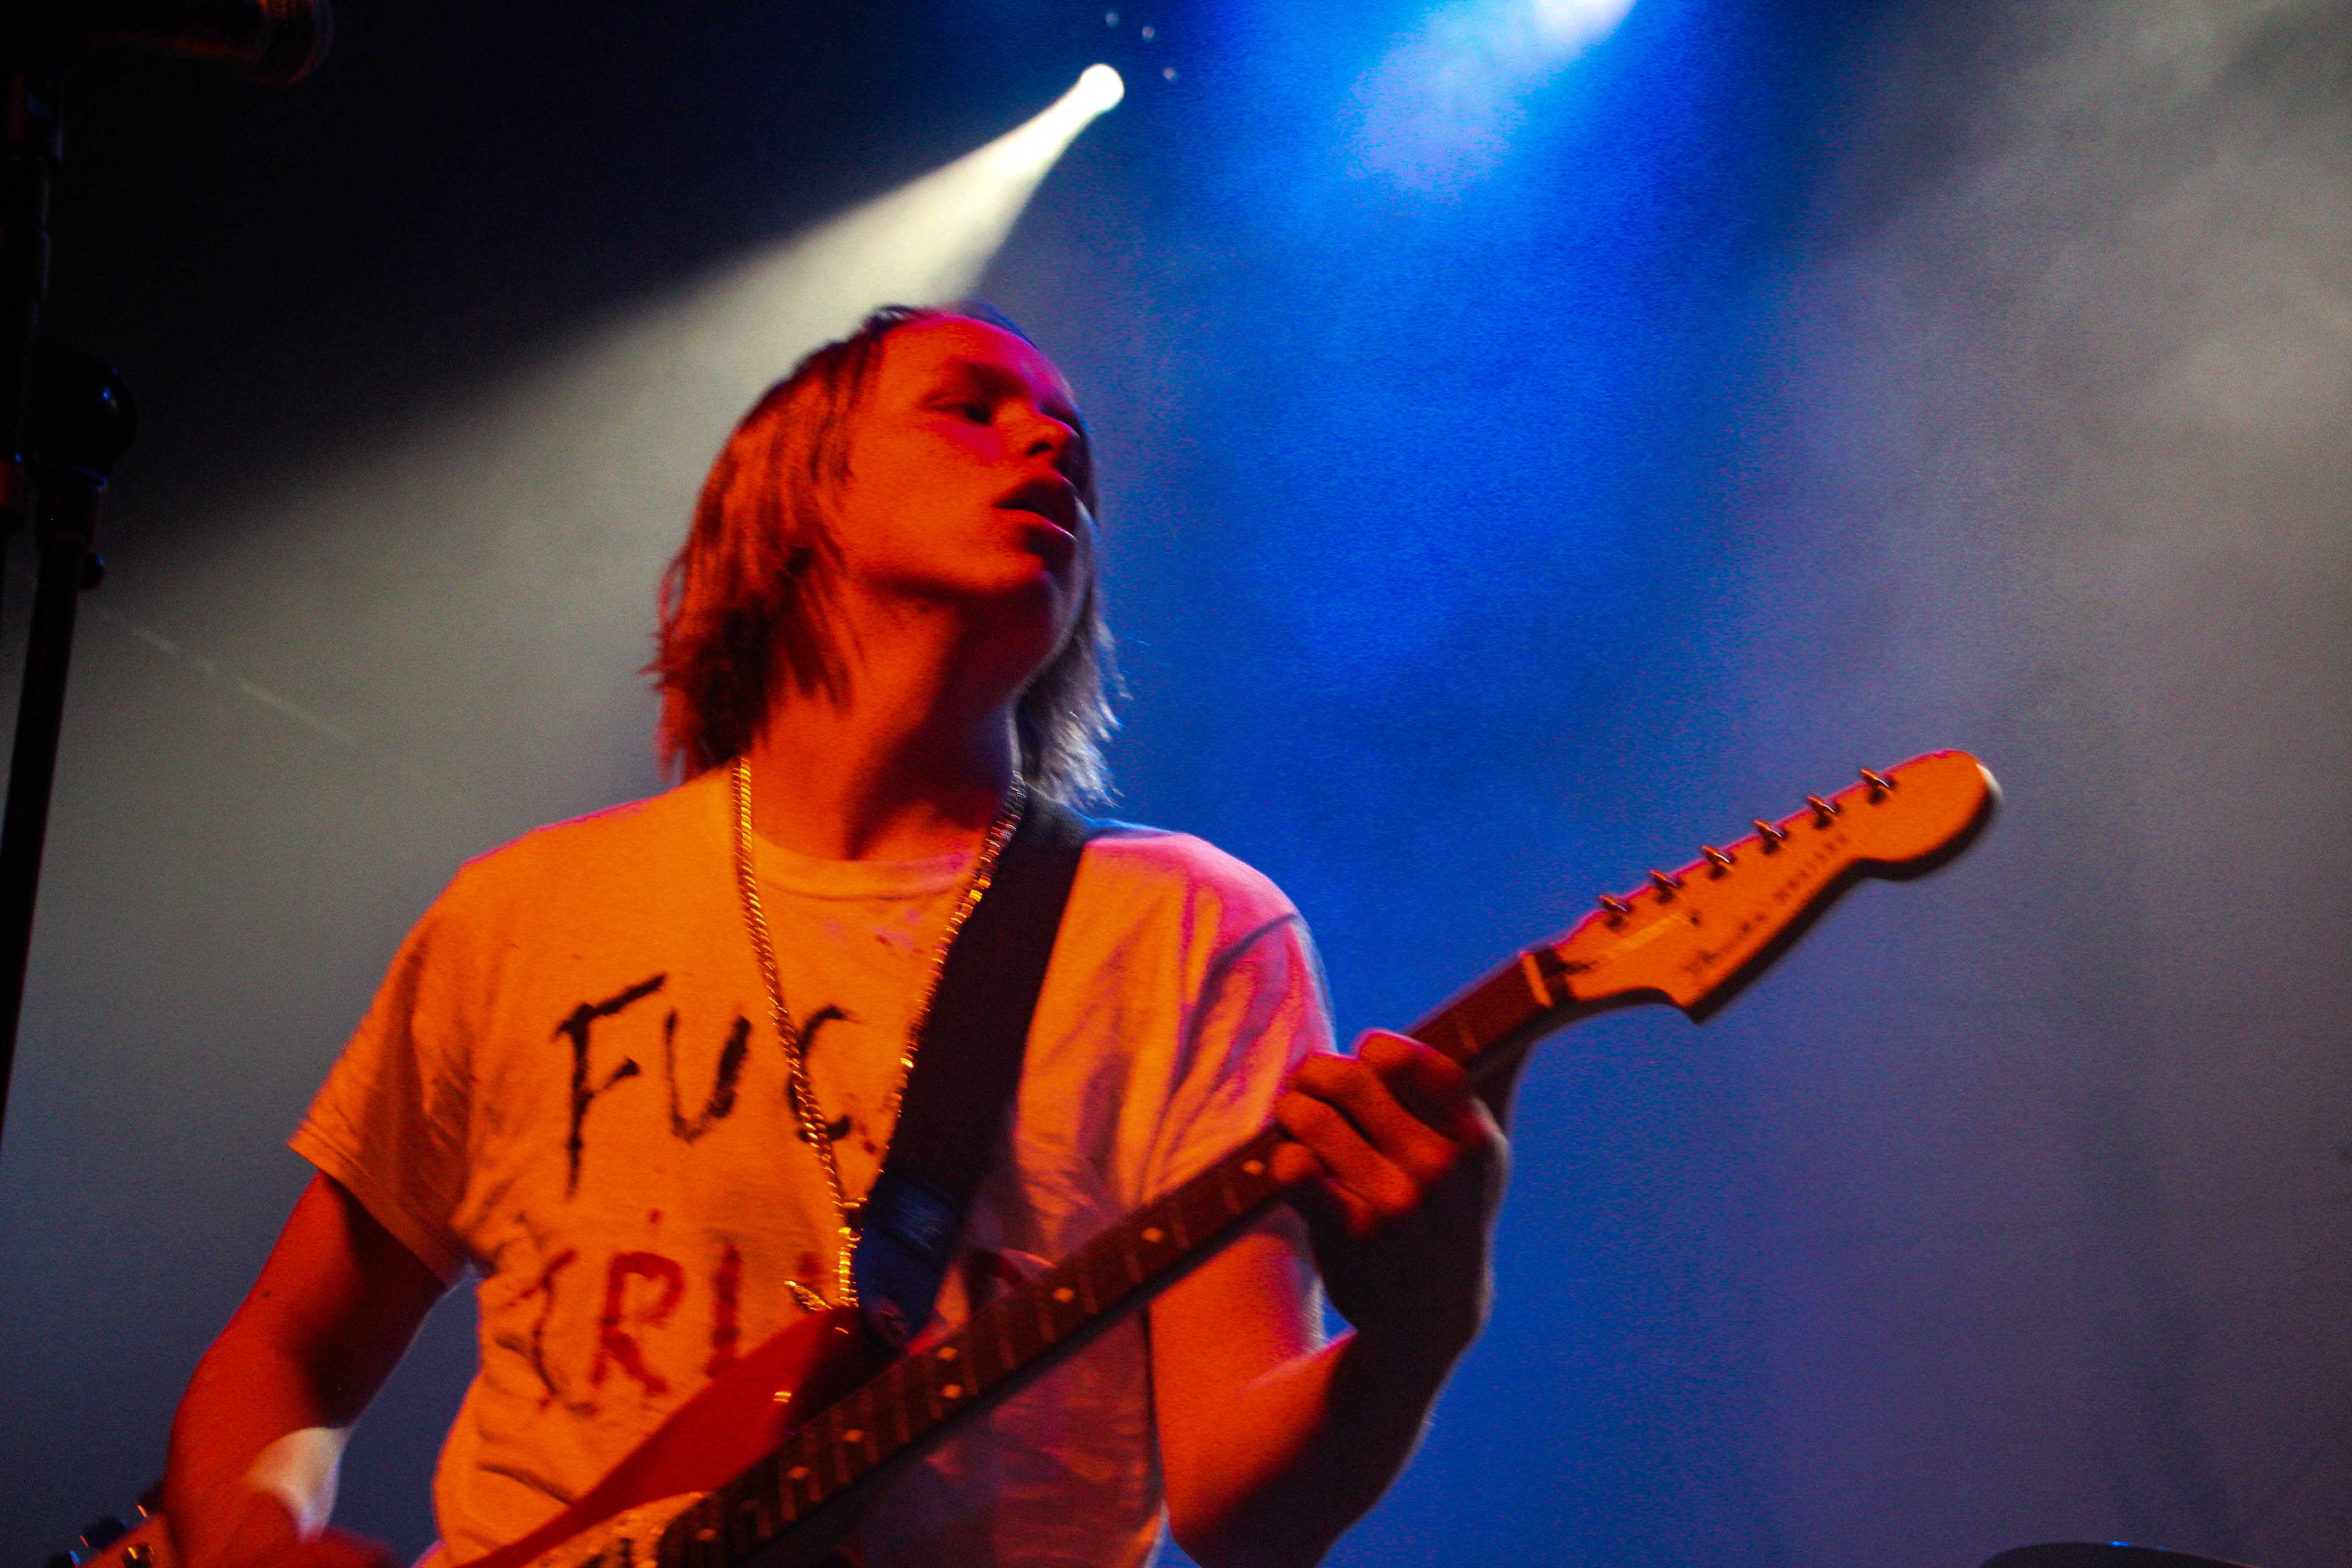 PHOTOS%3A+FIDLAR%2C+SWMRS%2C+and+The+Frights+Concert